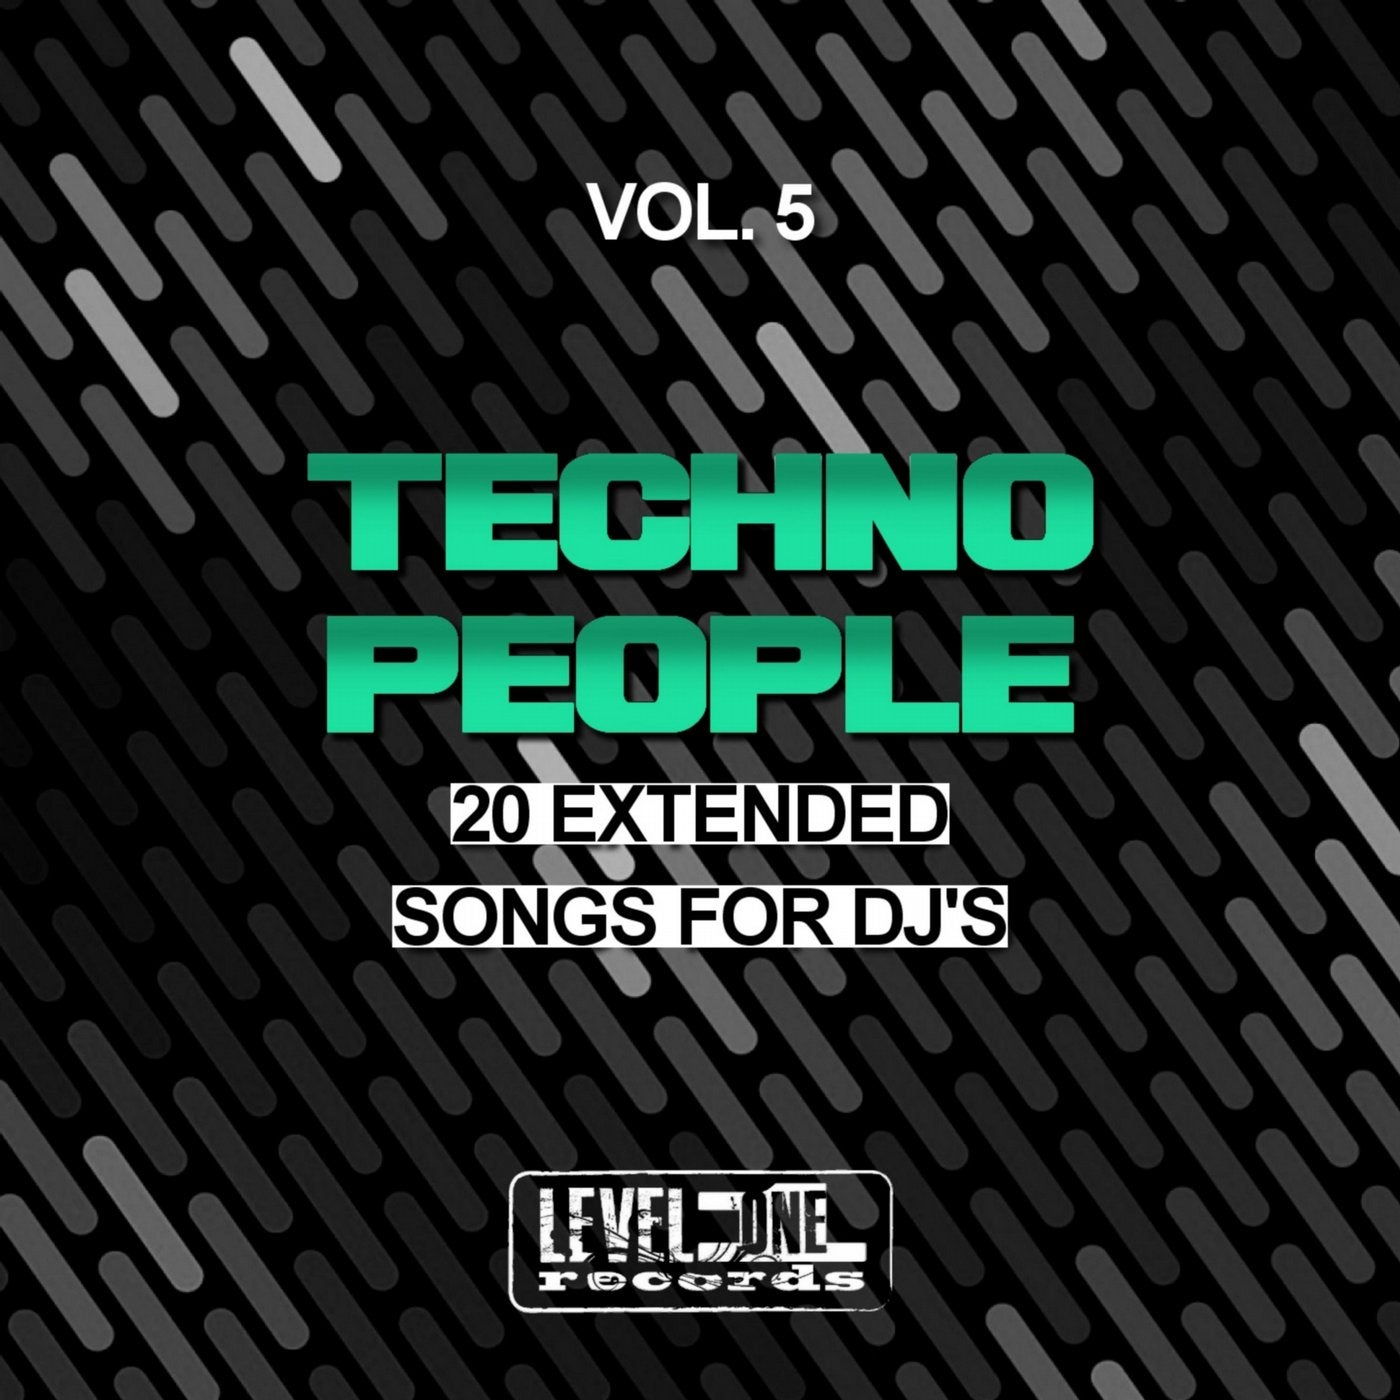 Techno People, Vol. 5 (20 Extended Songs For DJ's)